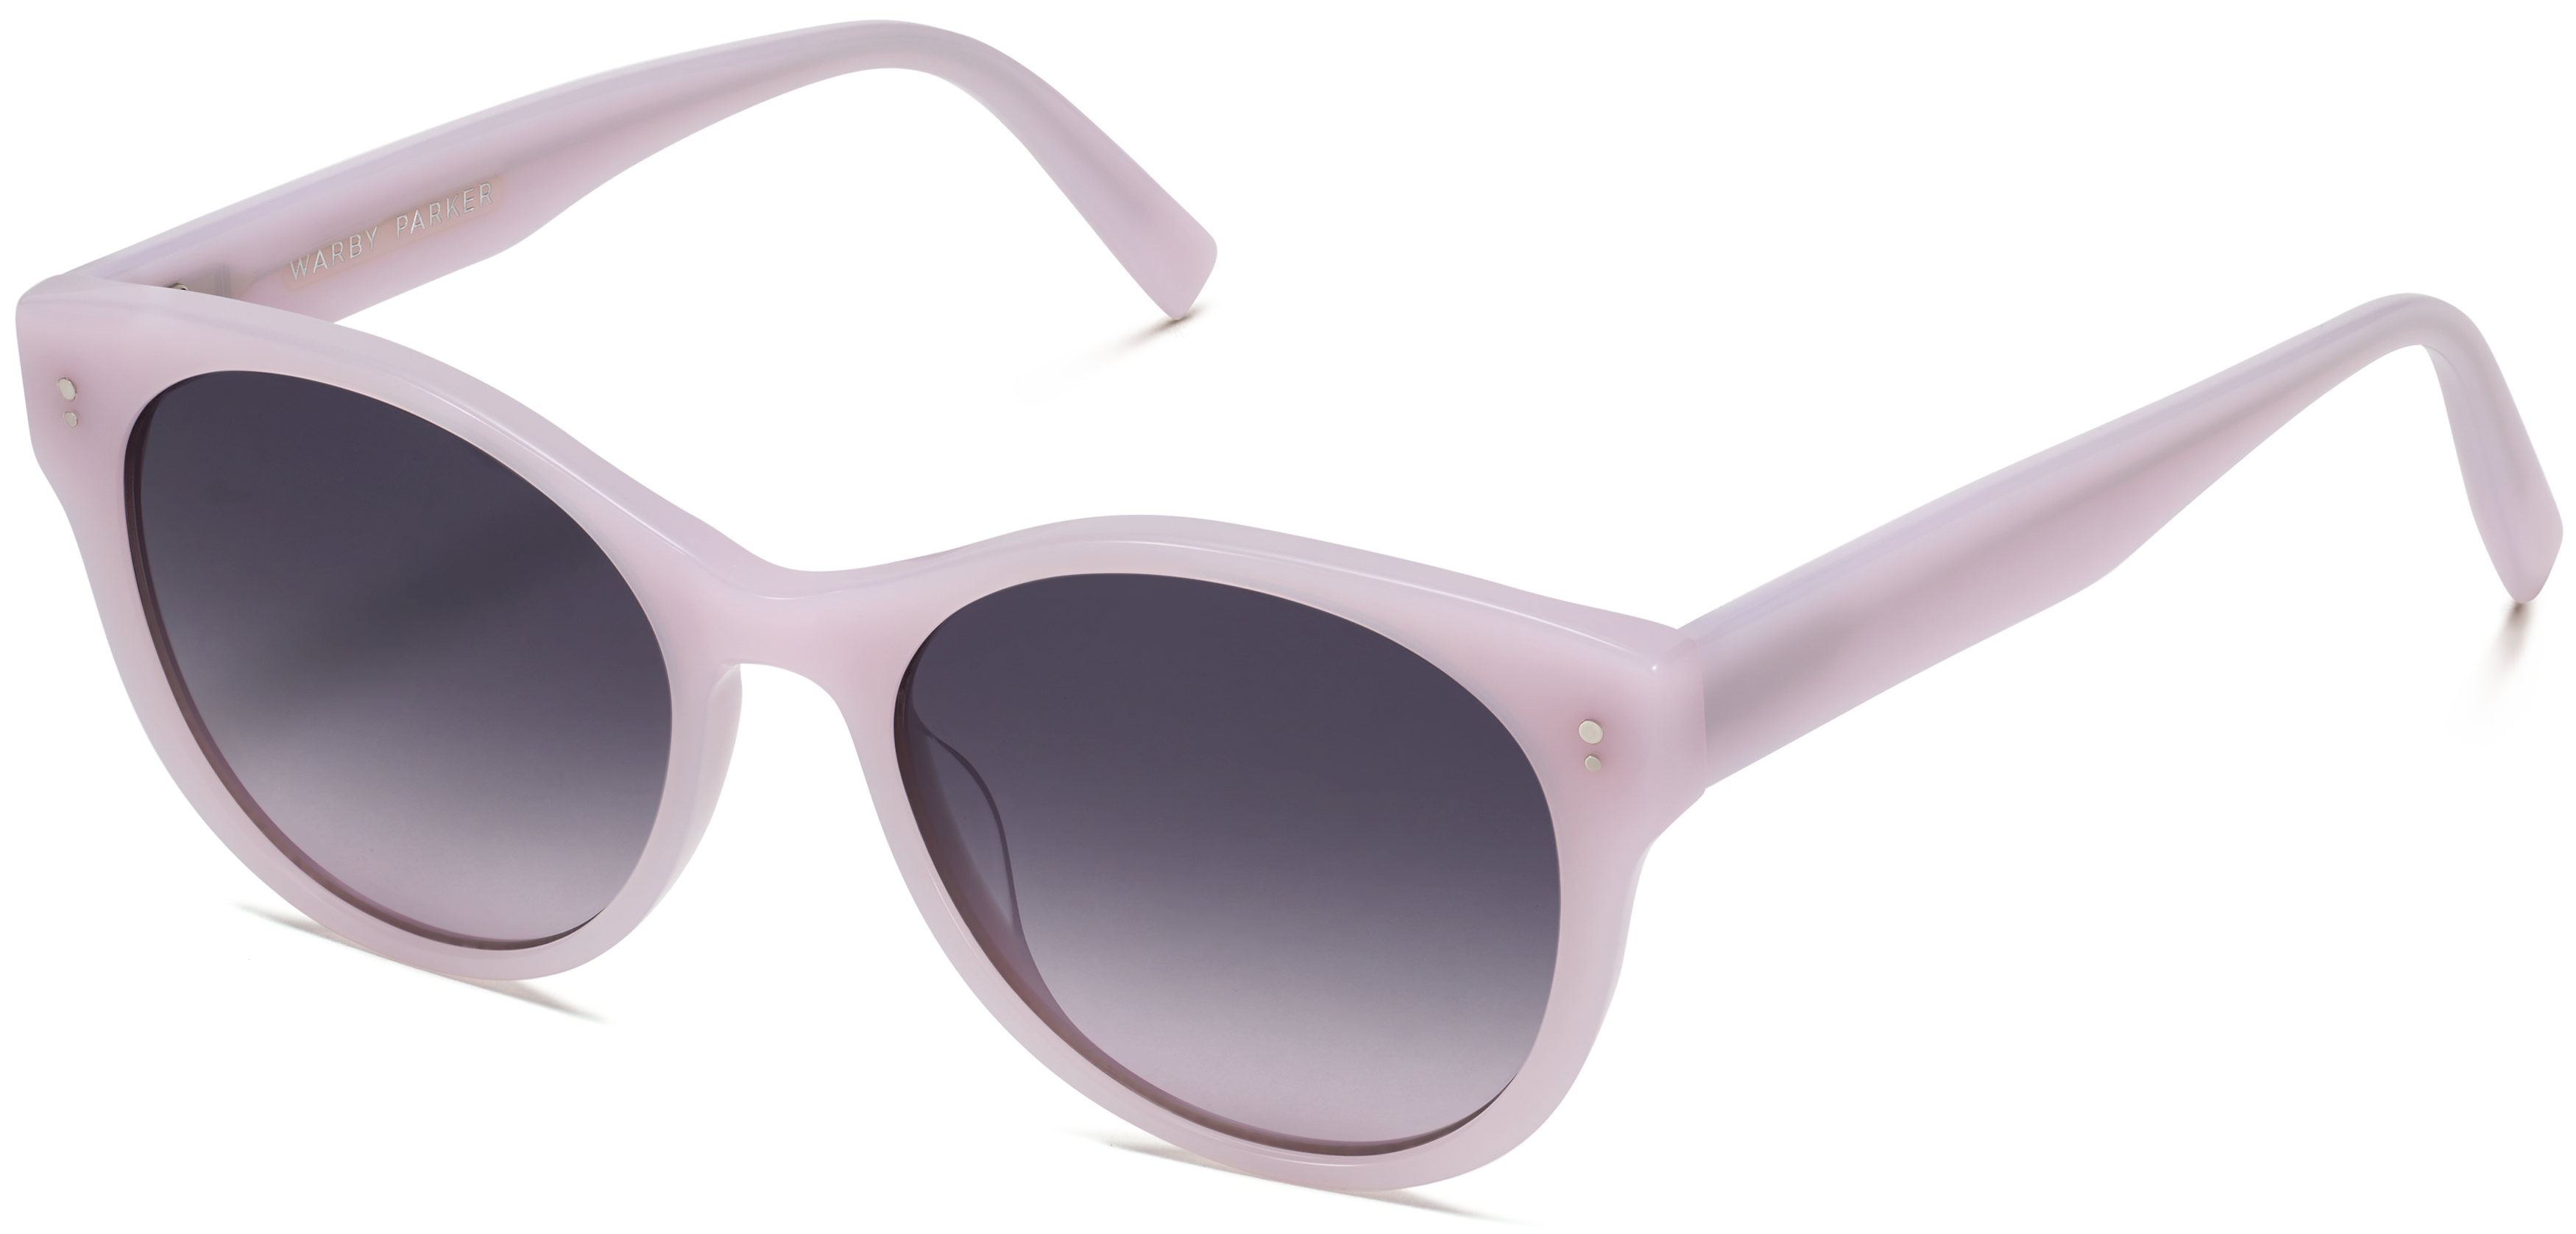 Warby Parker x Off-White Are Your New Favorite Sunglasses